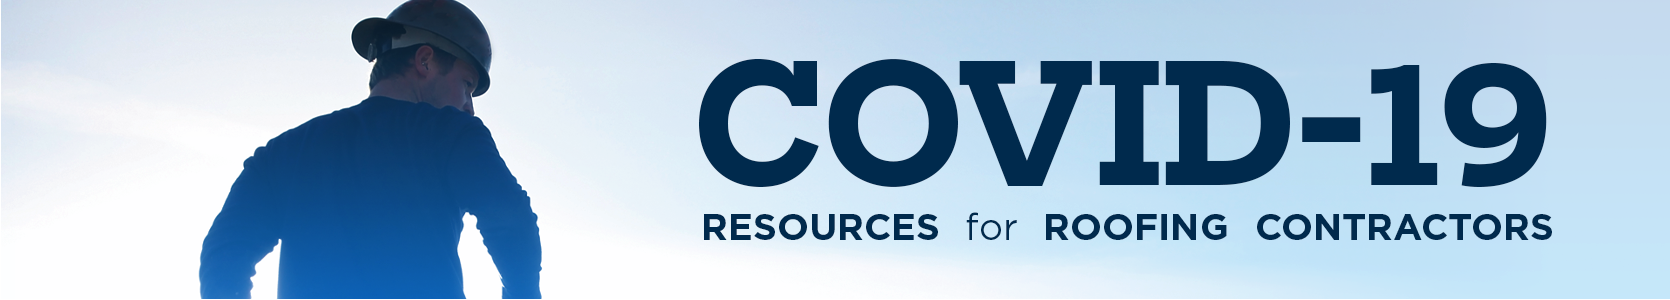 NRCA Covid-19 Roofing Contractor Resources - Learn from the Source